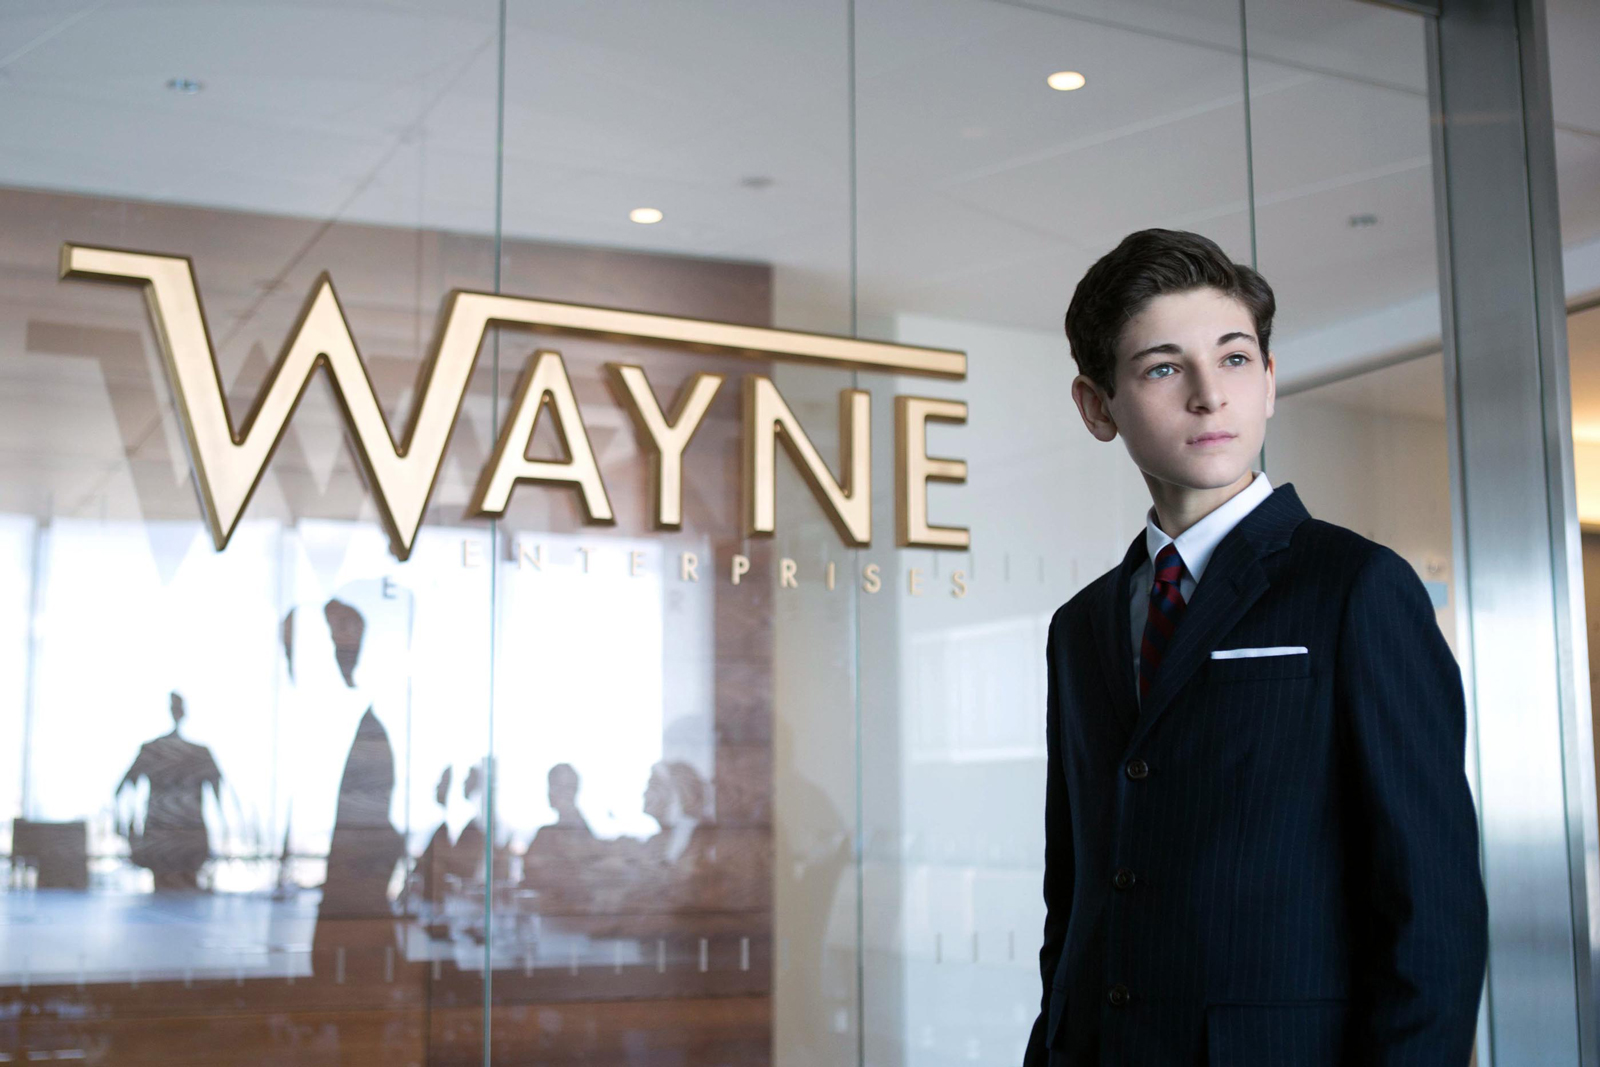 David Mazouz as the young Bruce Watyne in Gotham's "The Blind Fortune Teller"